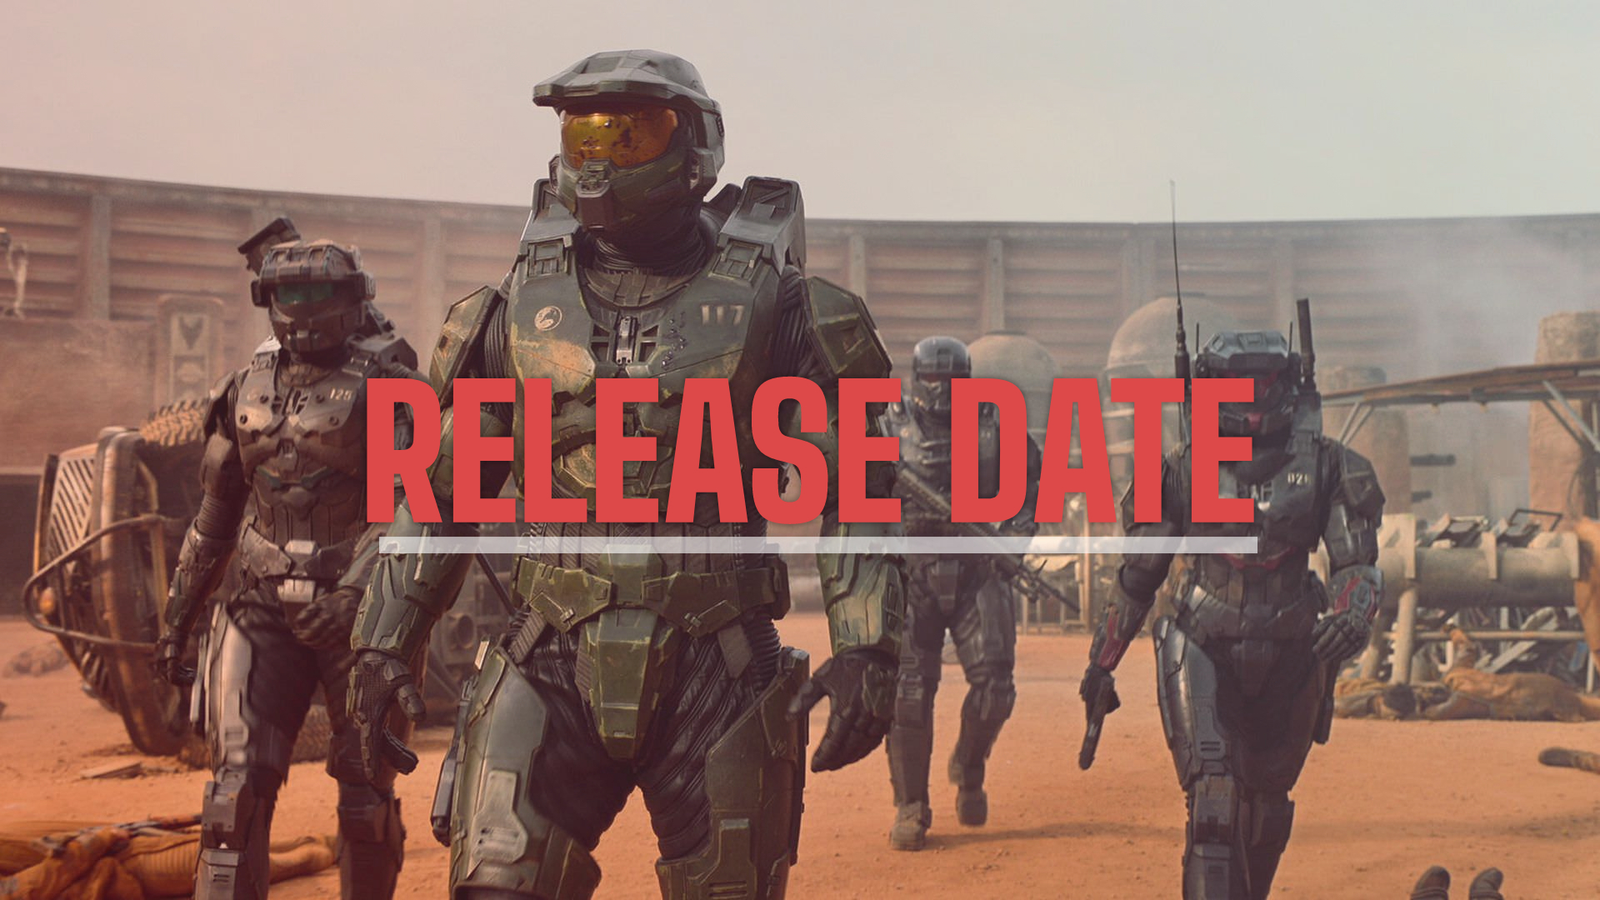 Halo TV series trailer reveals Cortana and its release date